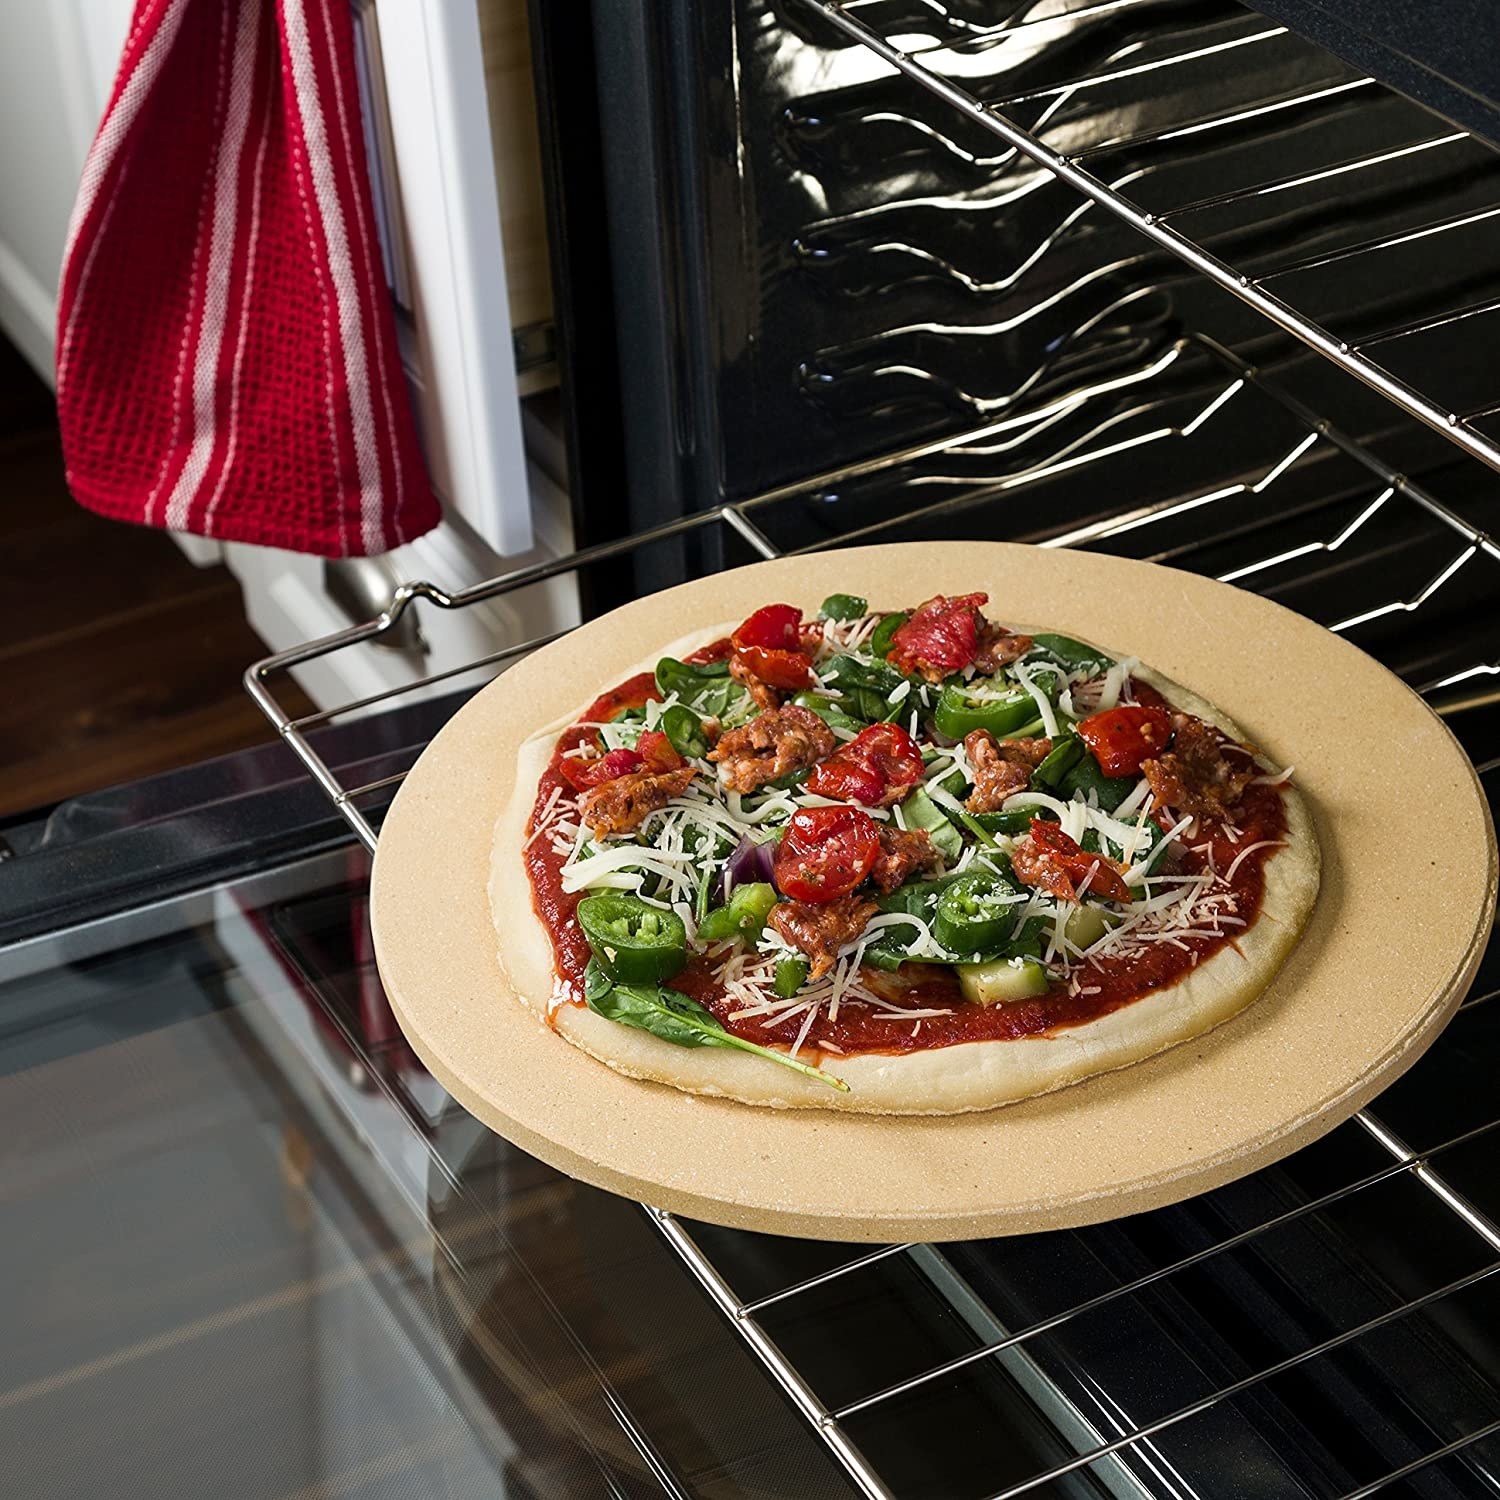 A pizza on the stone inside an oven on a rack